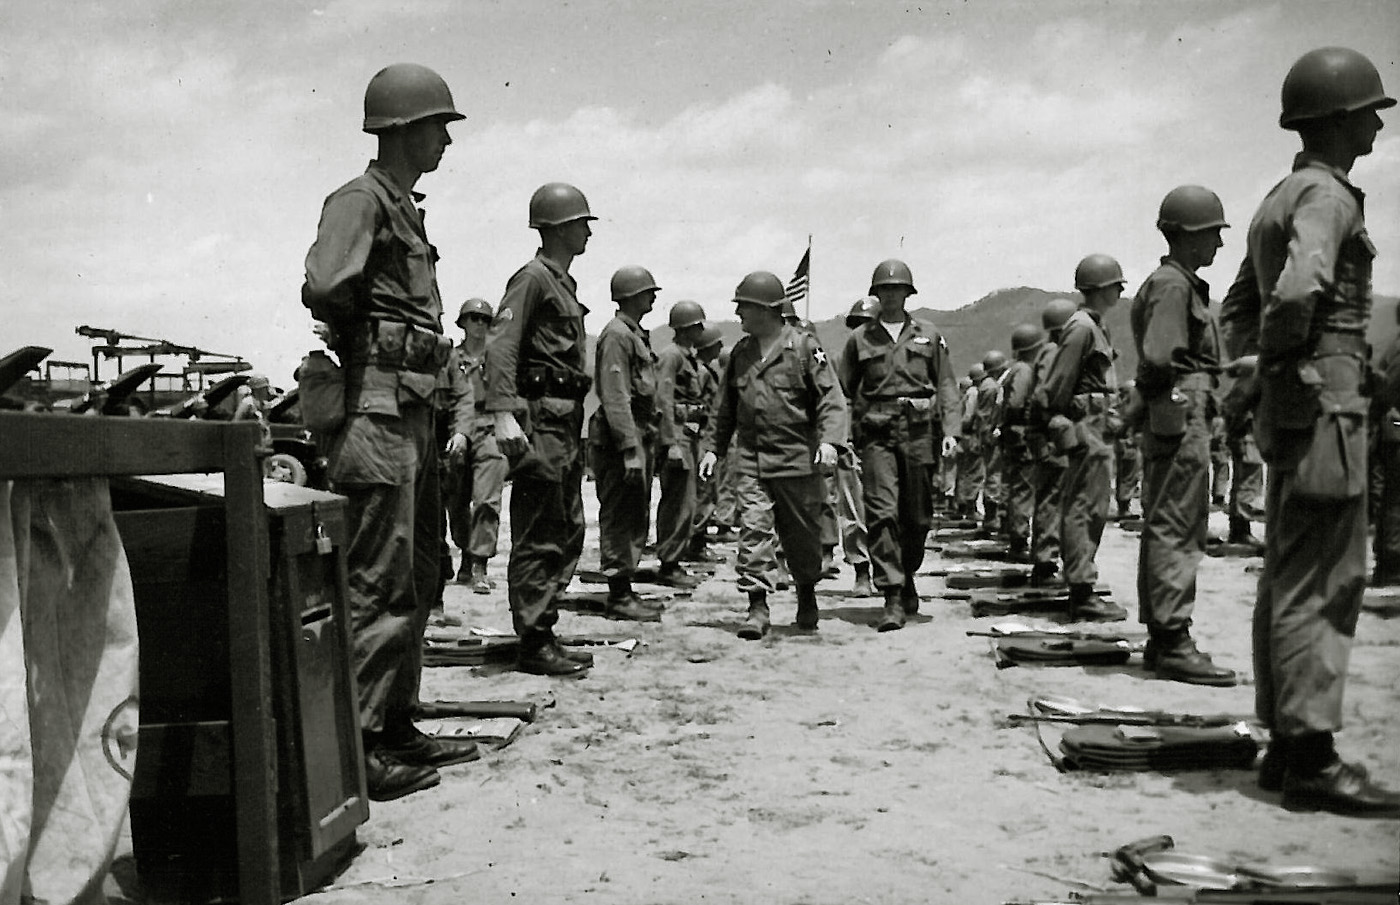 Shorpy Historical Picture Archive Inspection Korean War High Resolution Photo 4507